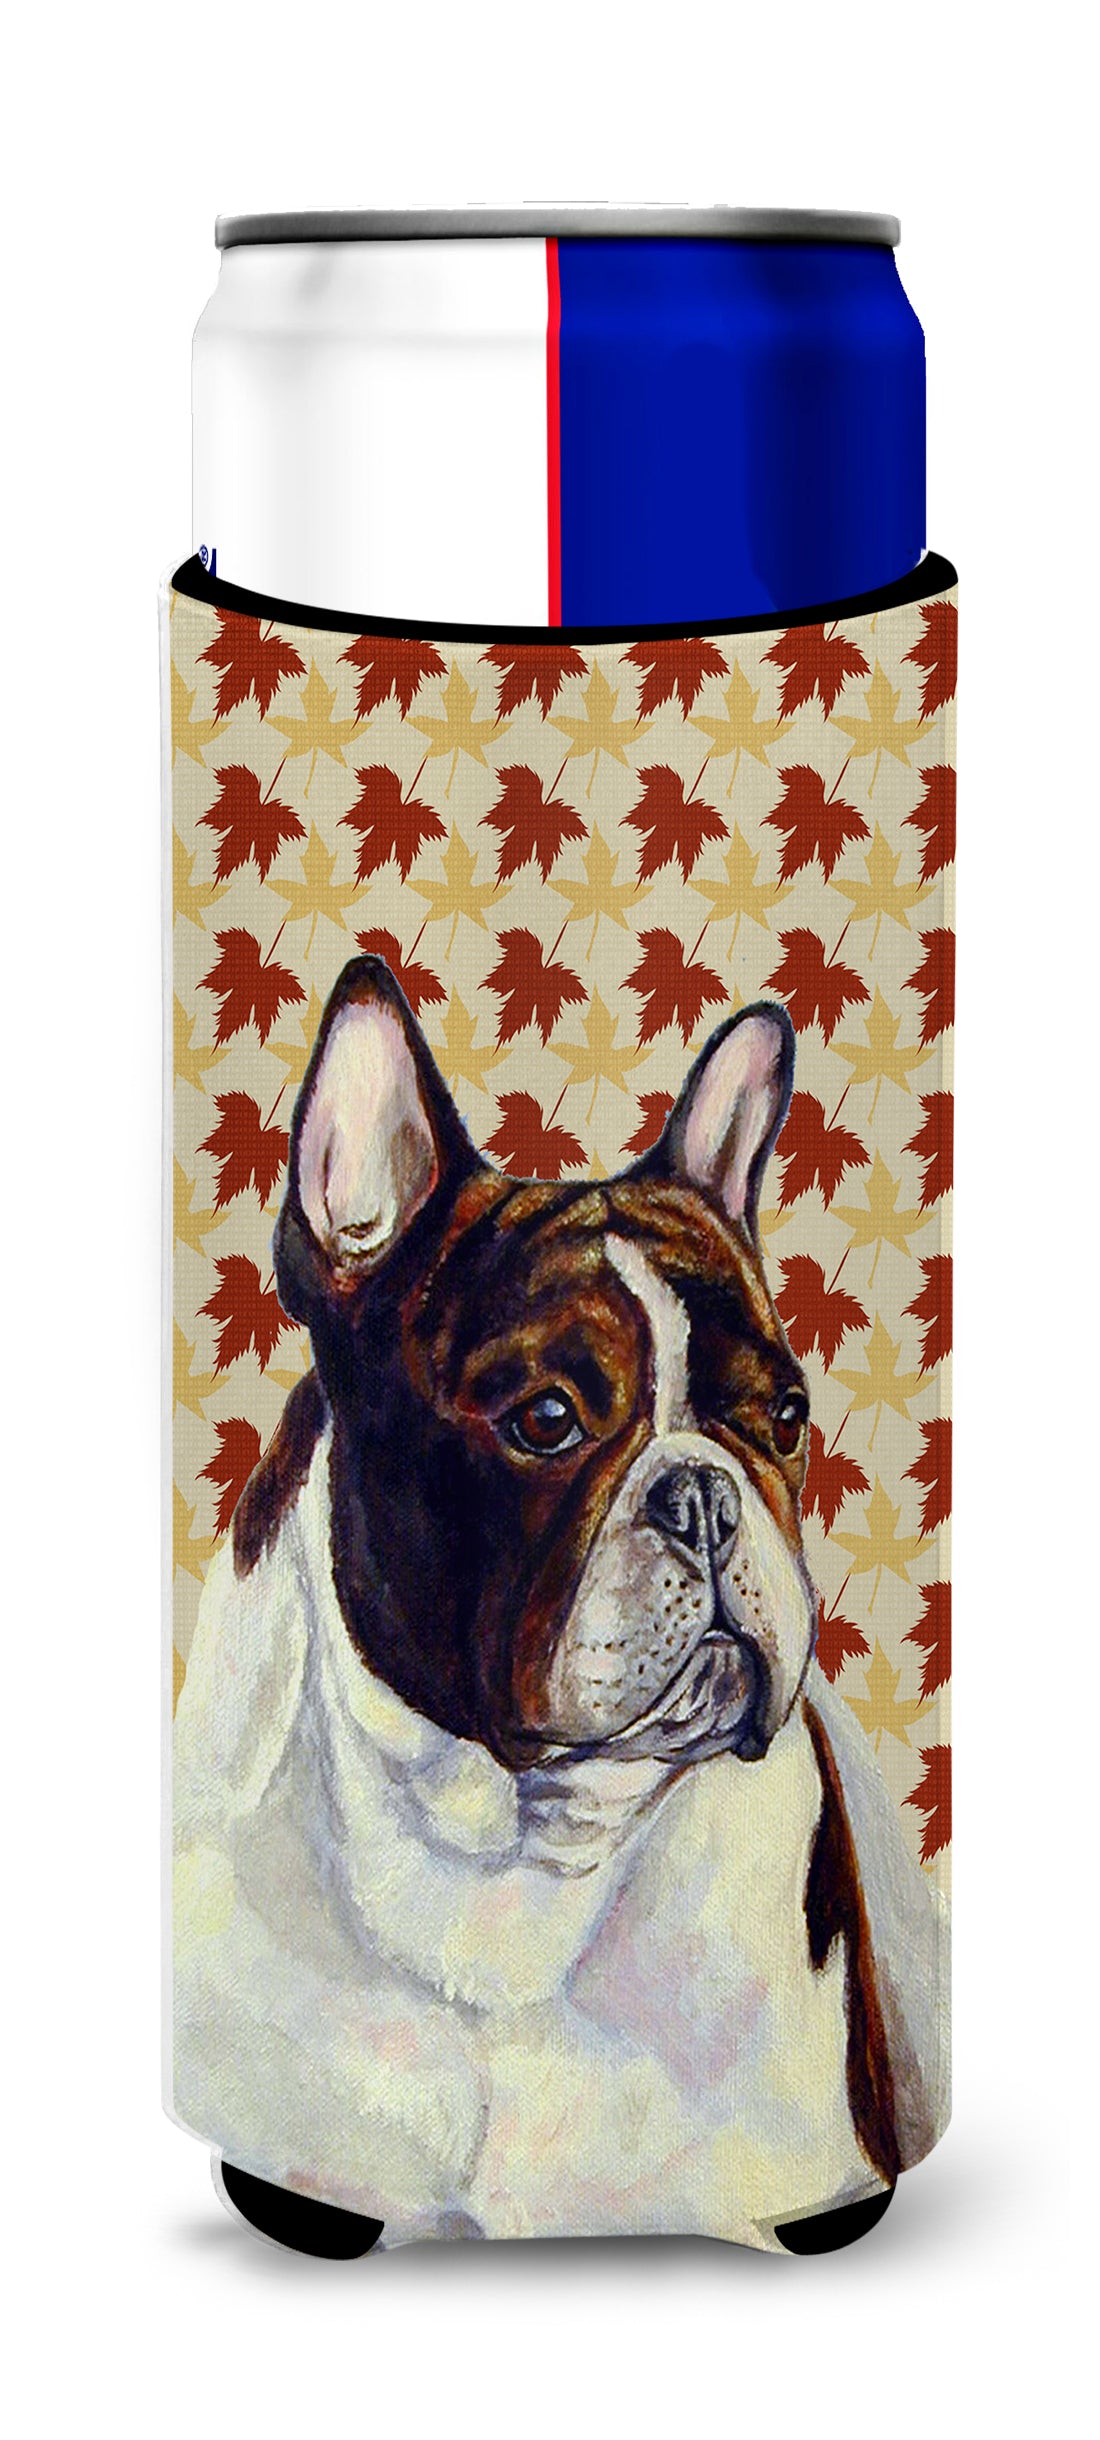 French Bulldog Fall Leaves Portrait Ultra Beverage Insulators for slim cans LH9112MUK.